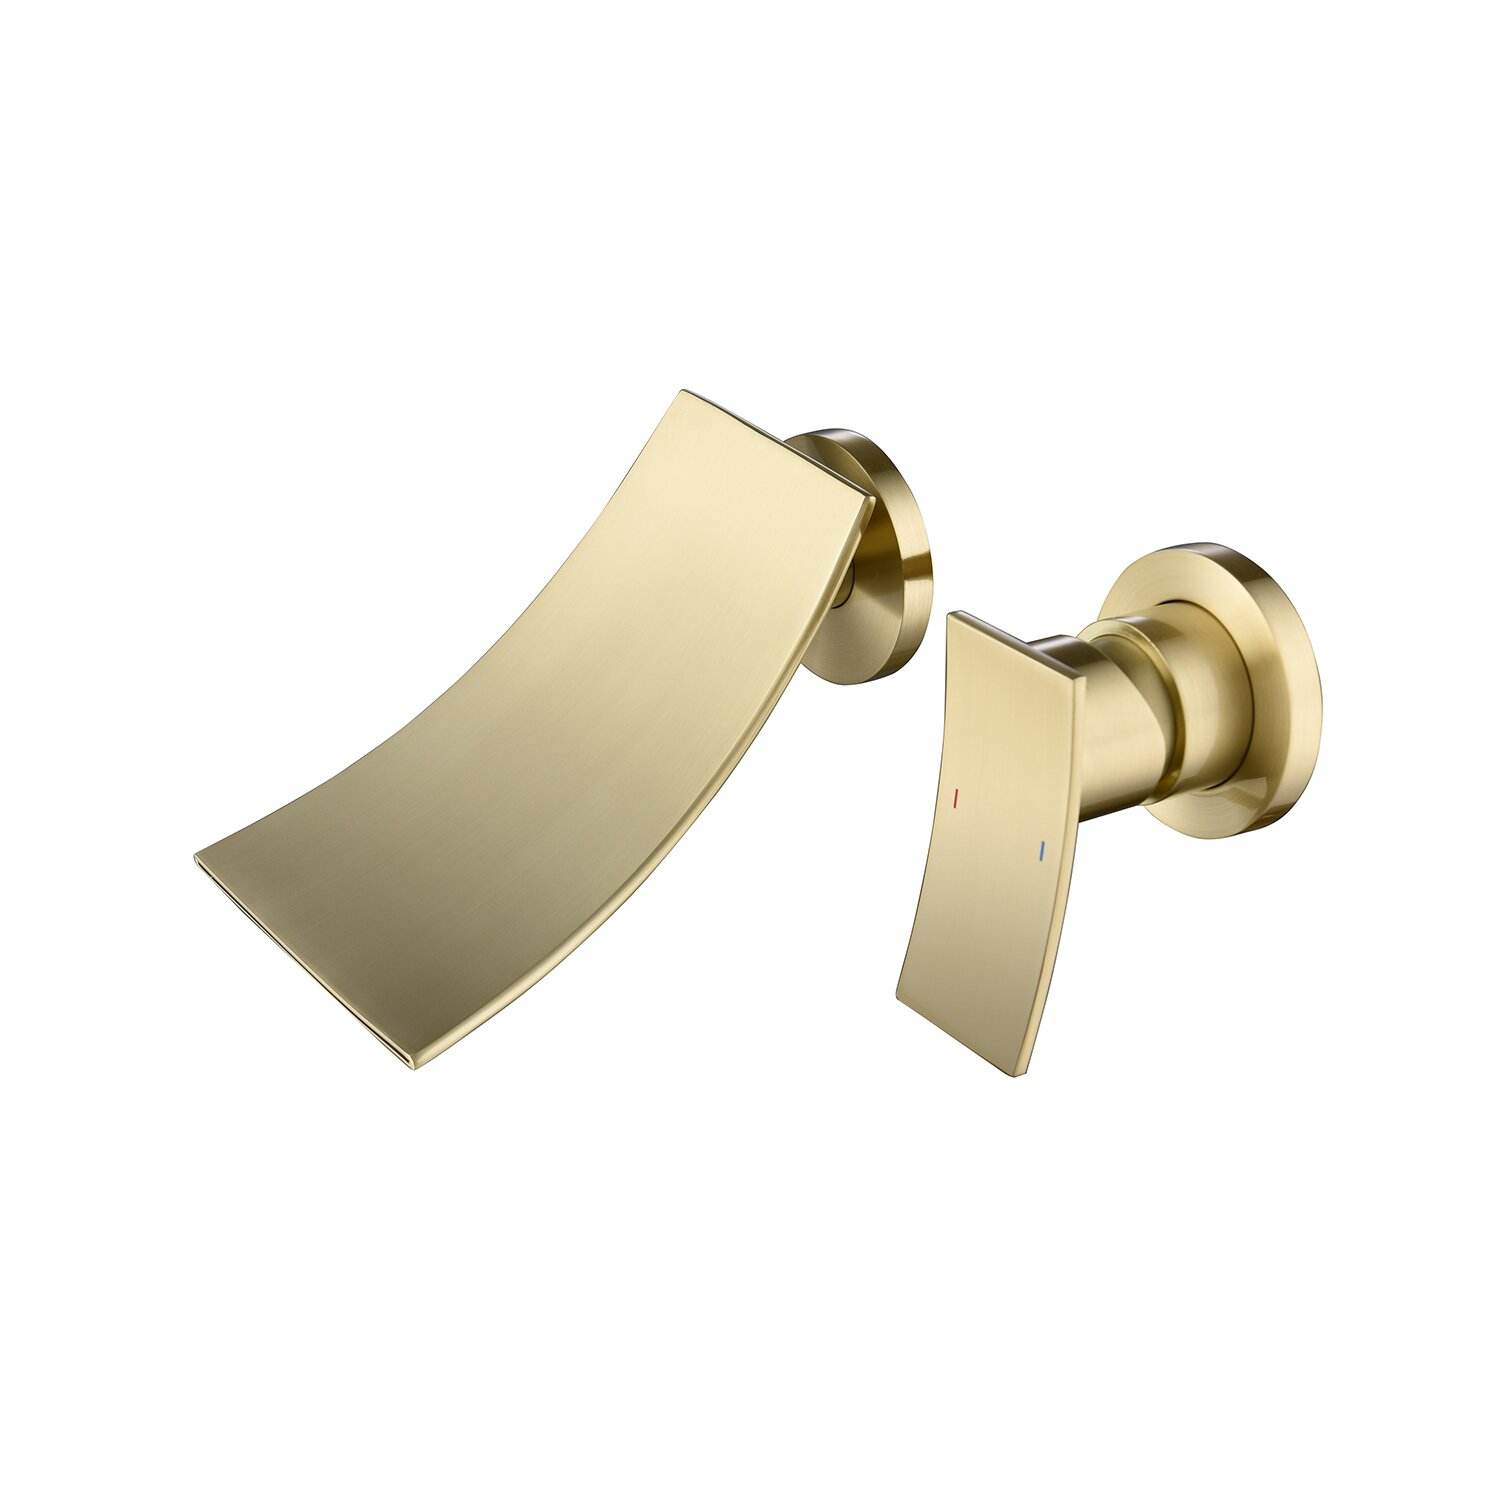 Brushed Gold wall mounted basin faucet